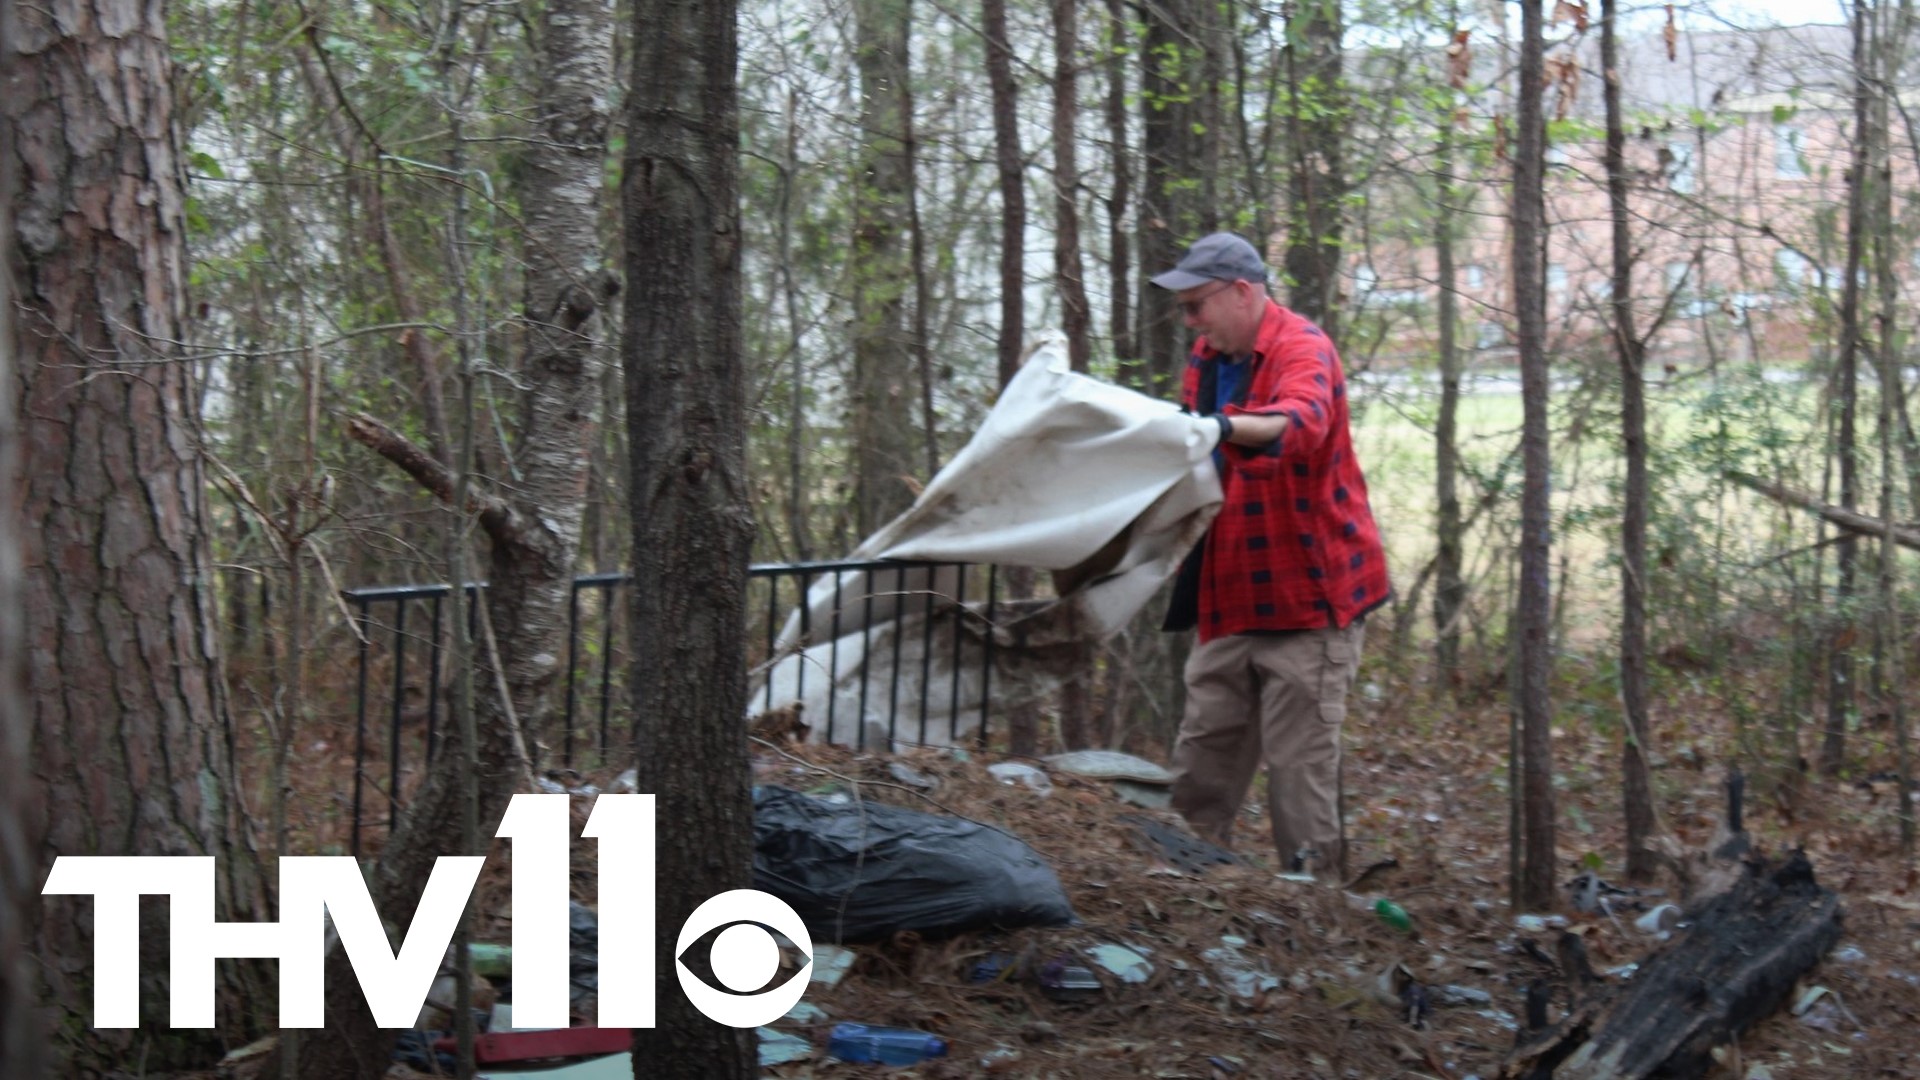 ARDOT and Benton Police Department cleared areas of homeless camps, but with overcrowded shelters, there are still questions about where people can go.